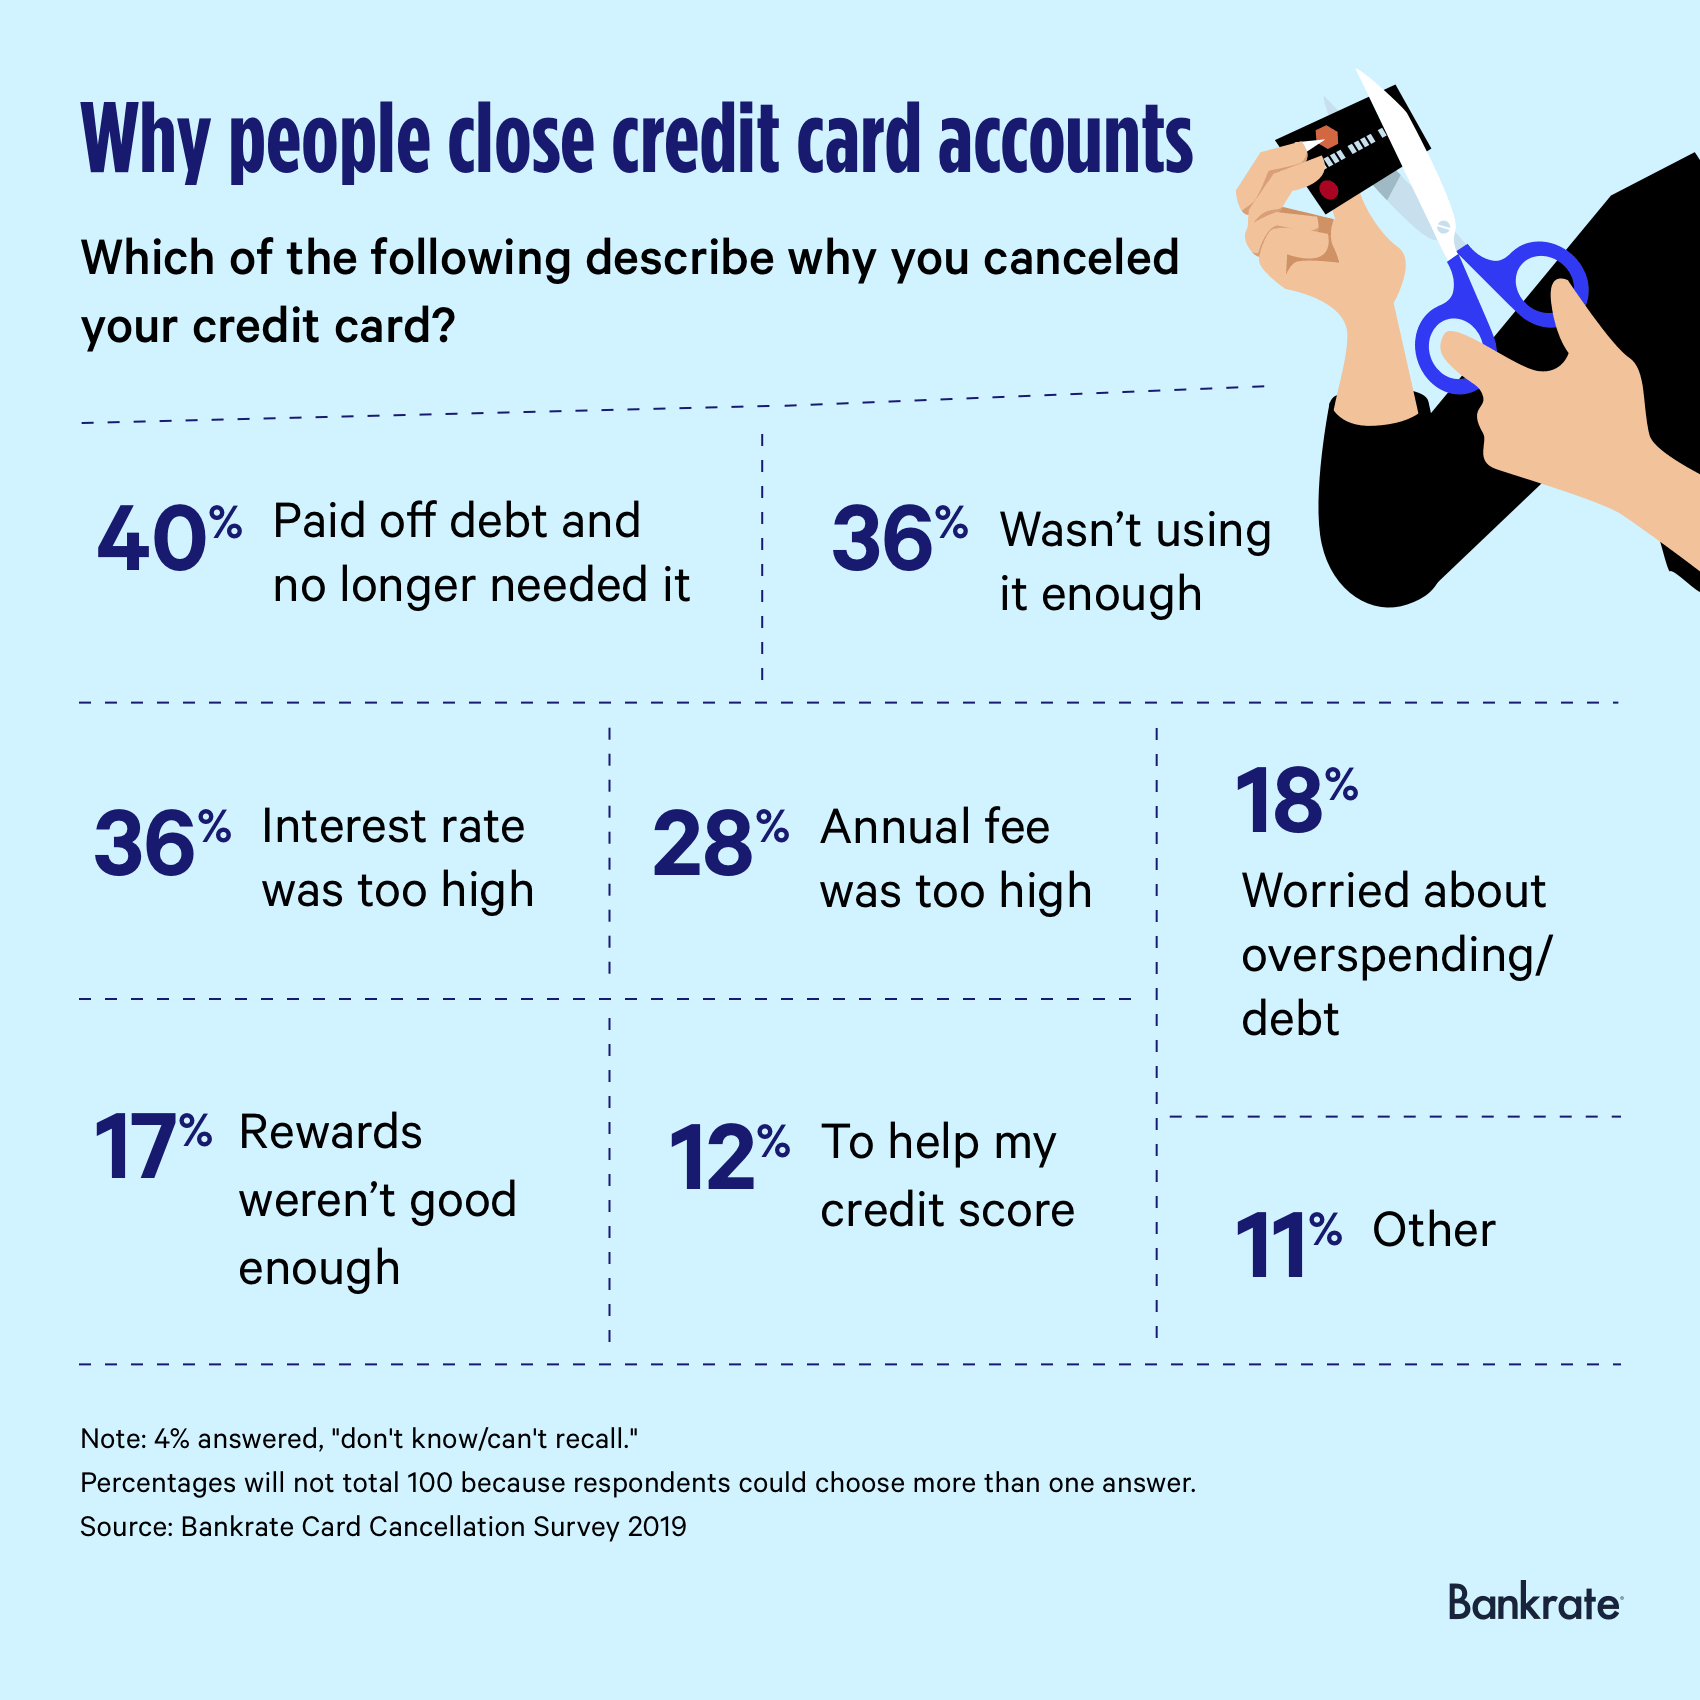 Reasons why credit card holders canceled their accounts